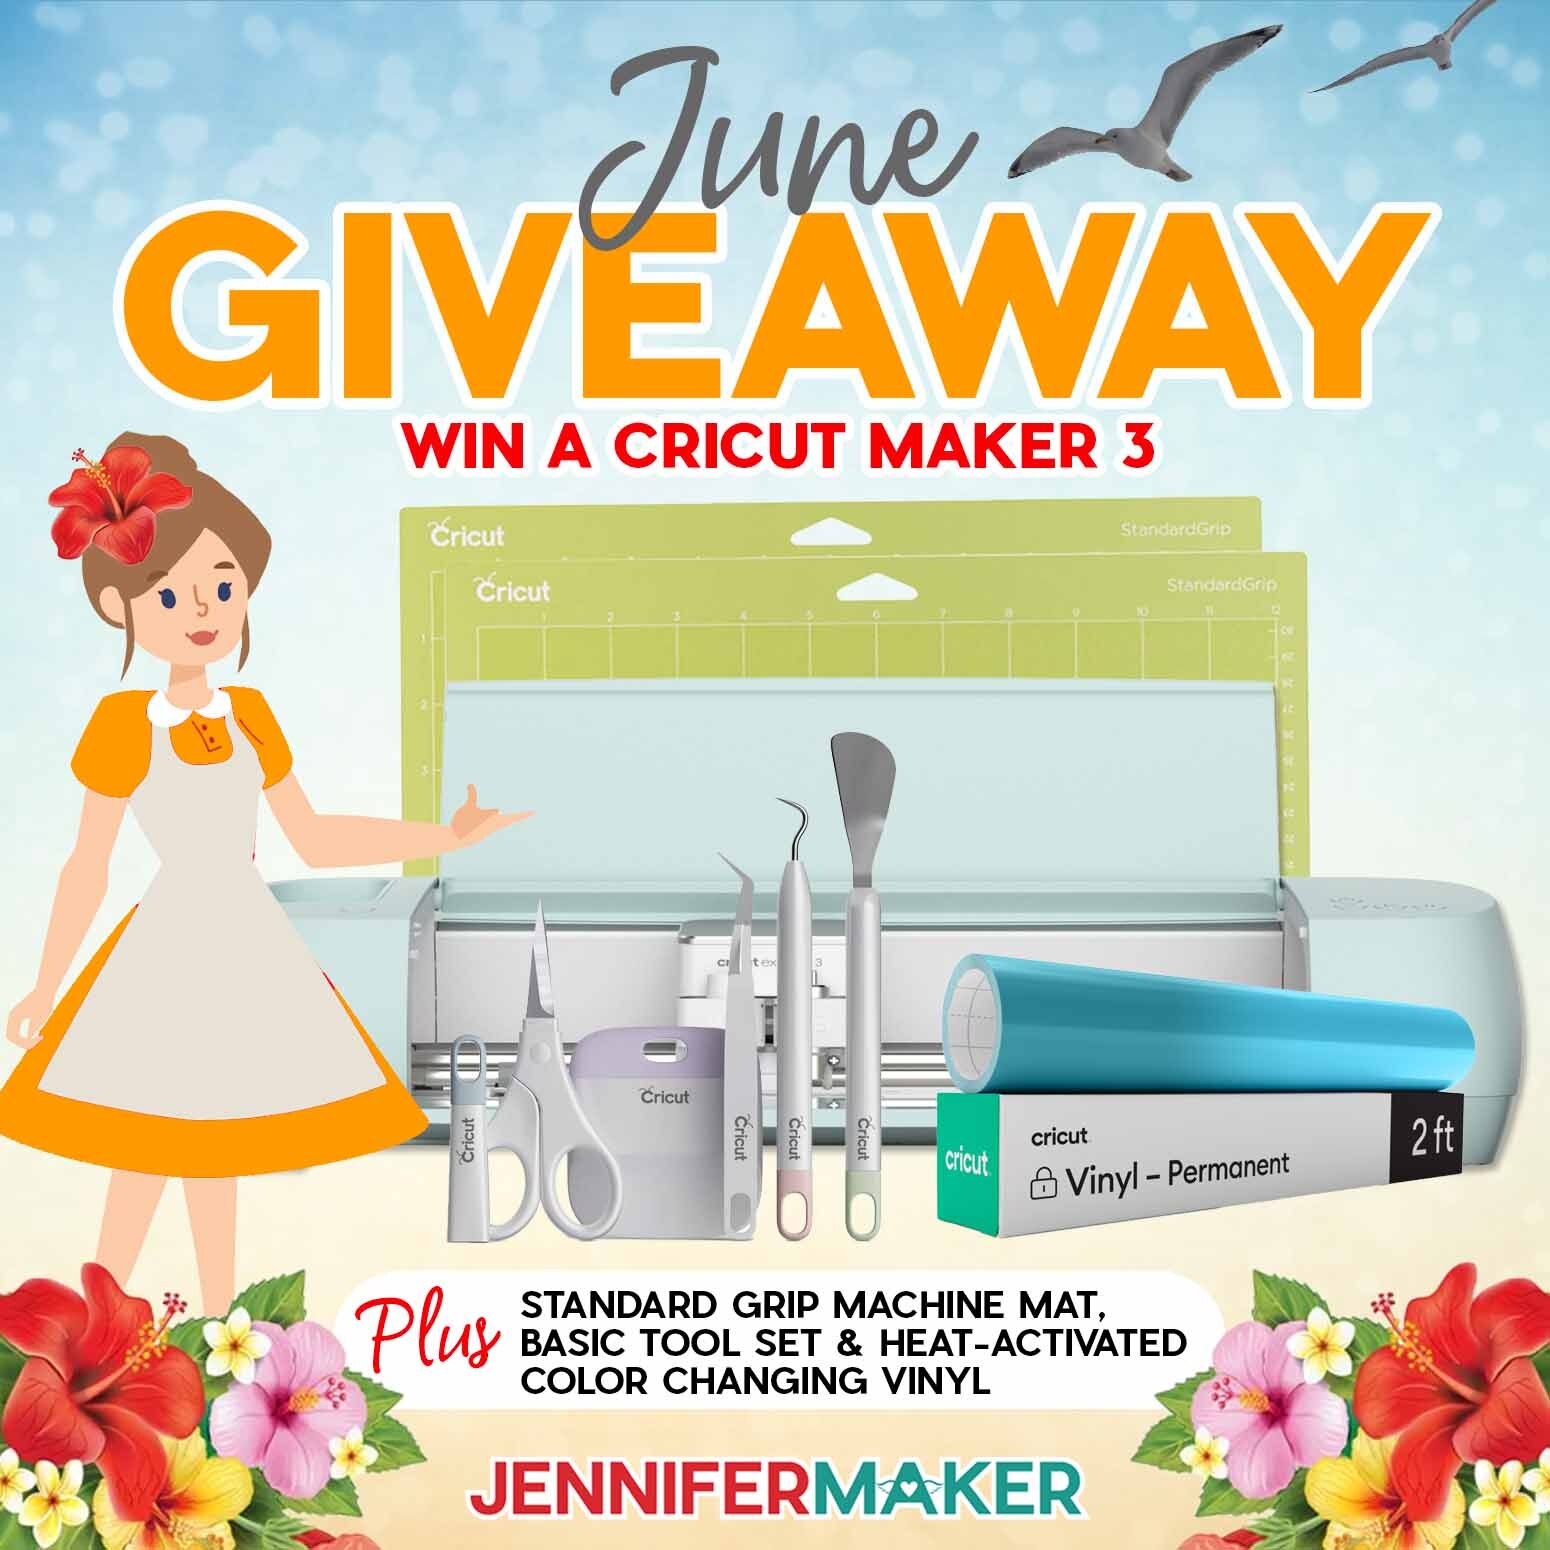 online contests, sweepstakes and giveaways - Cricut Giveaway: Enter to Win!